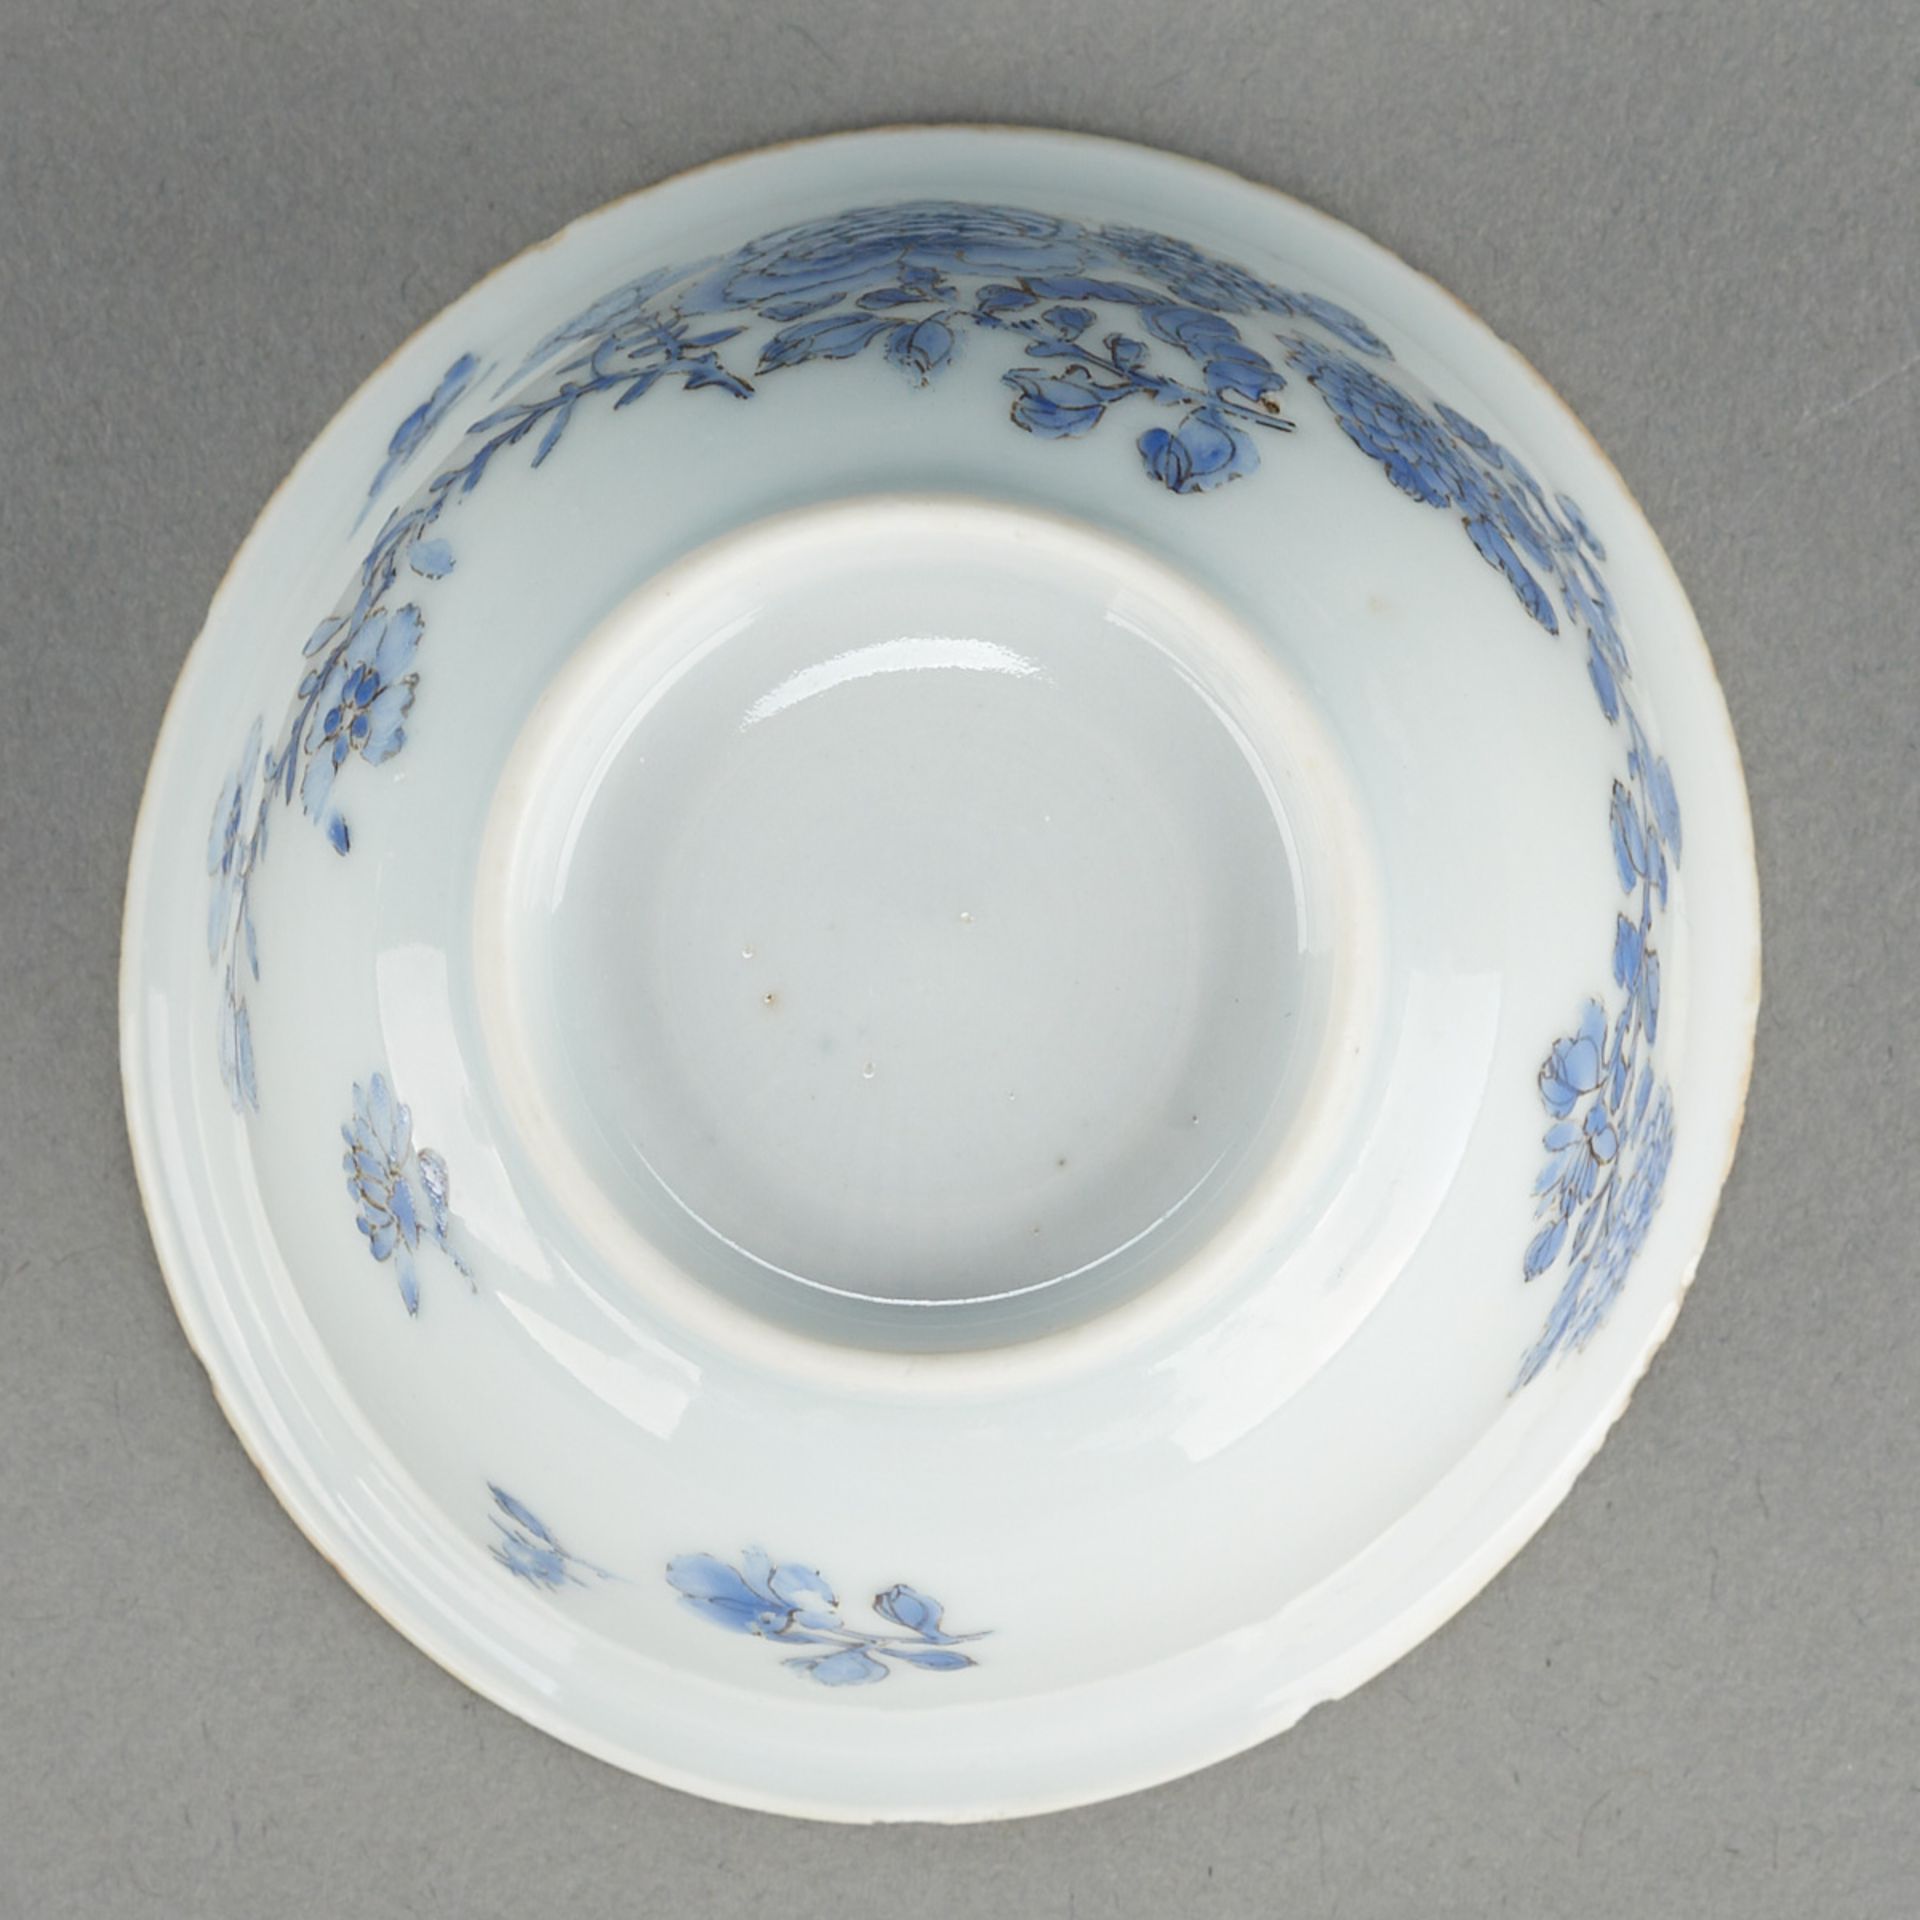 18th c. Chinese Porcelain Tea Bowl - Image 7 of 8